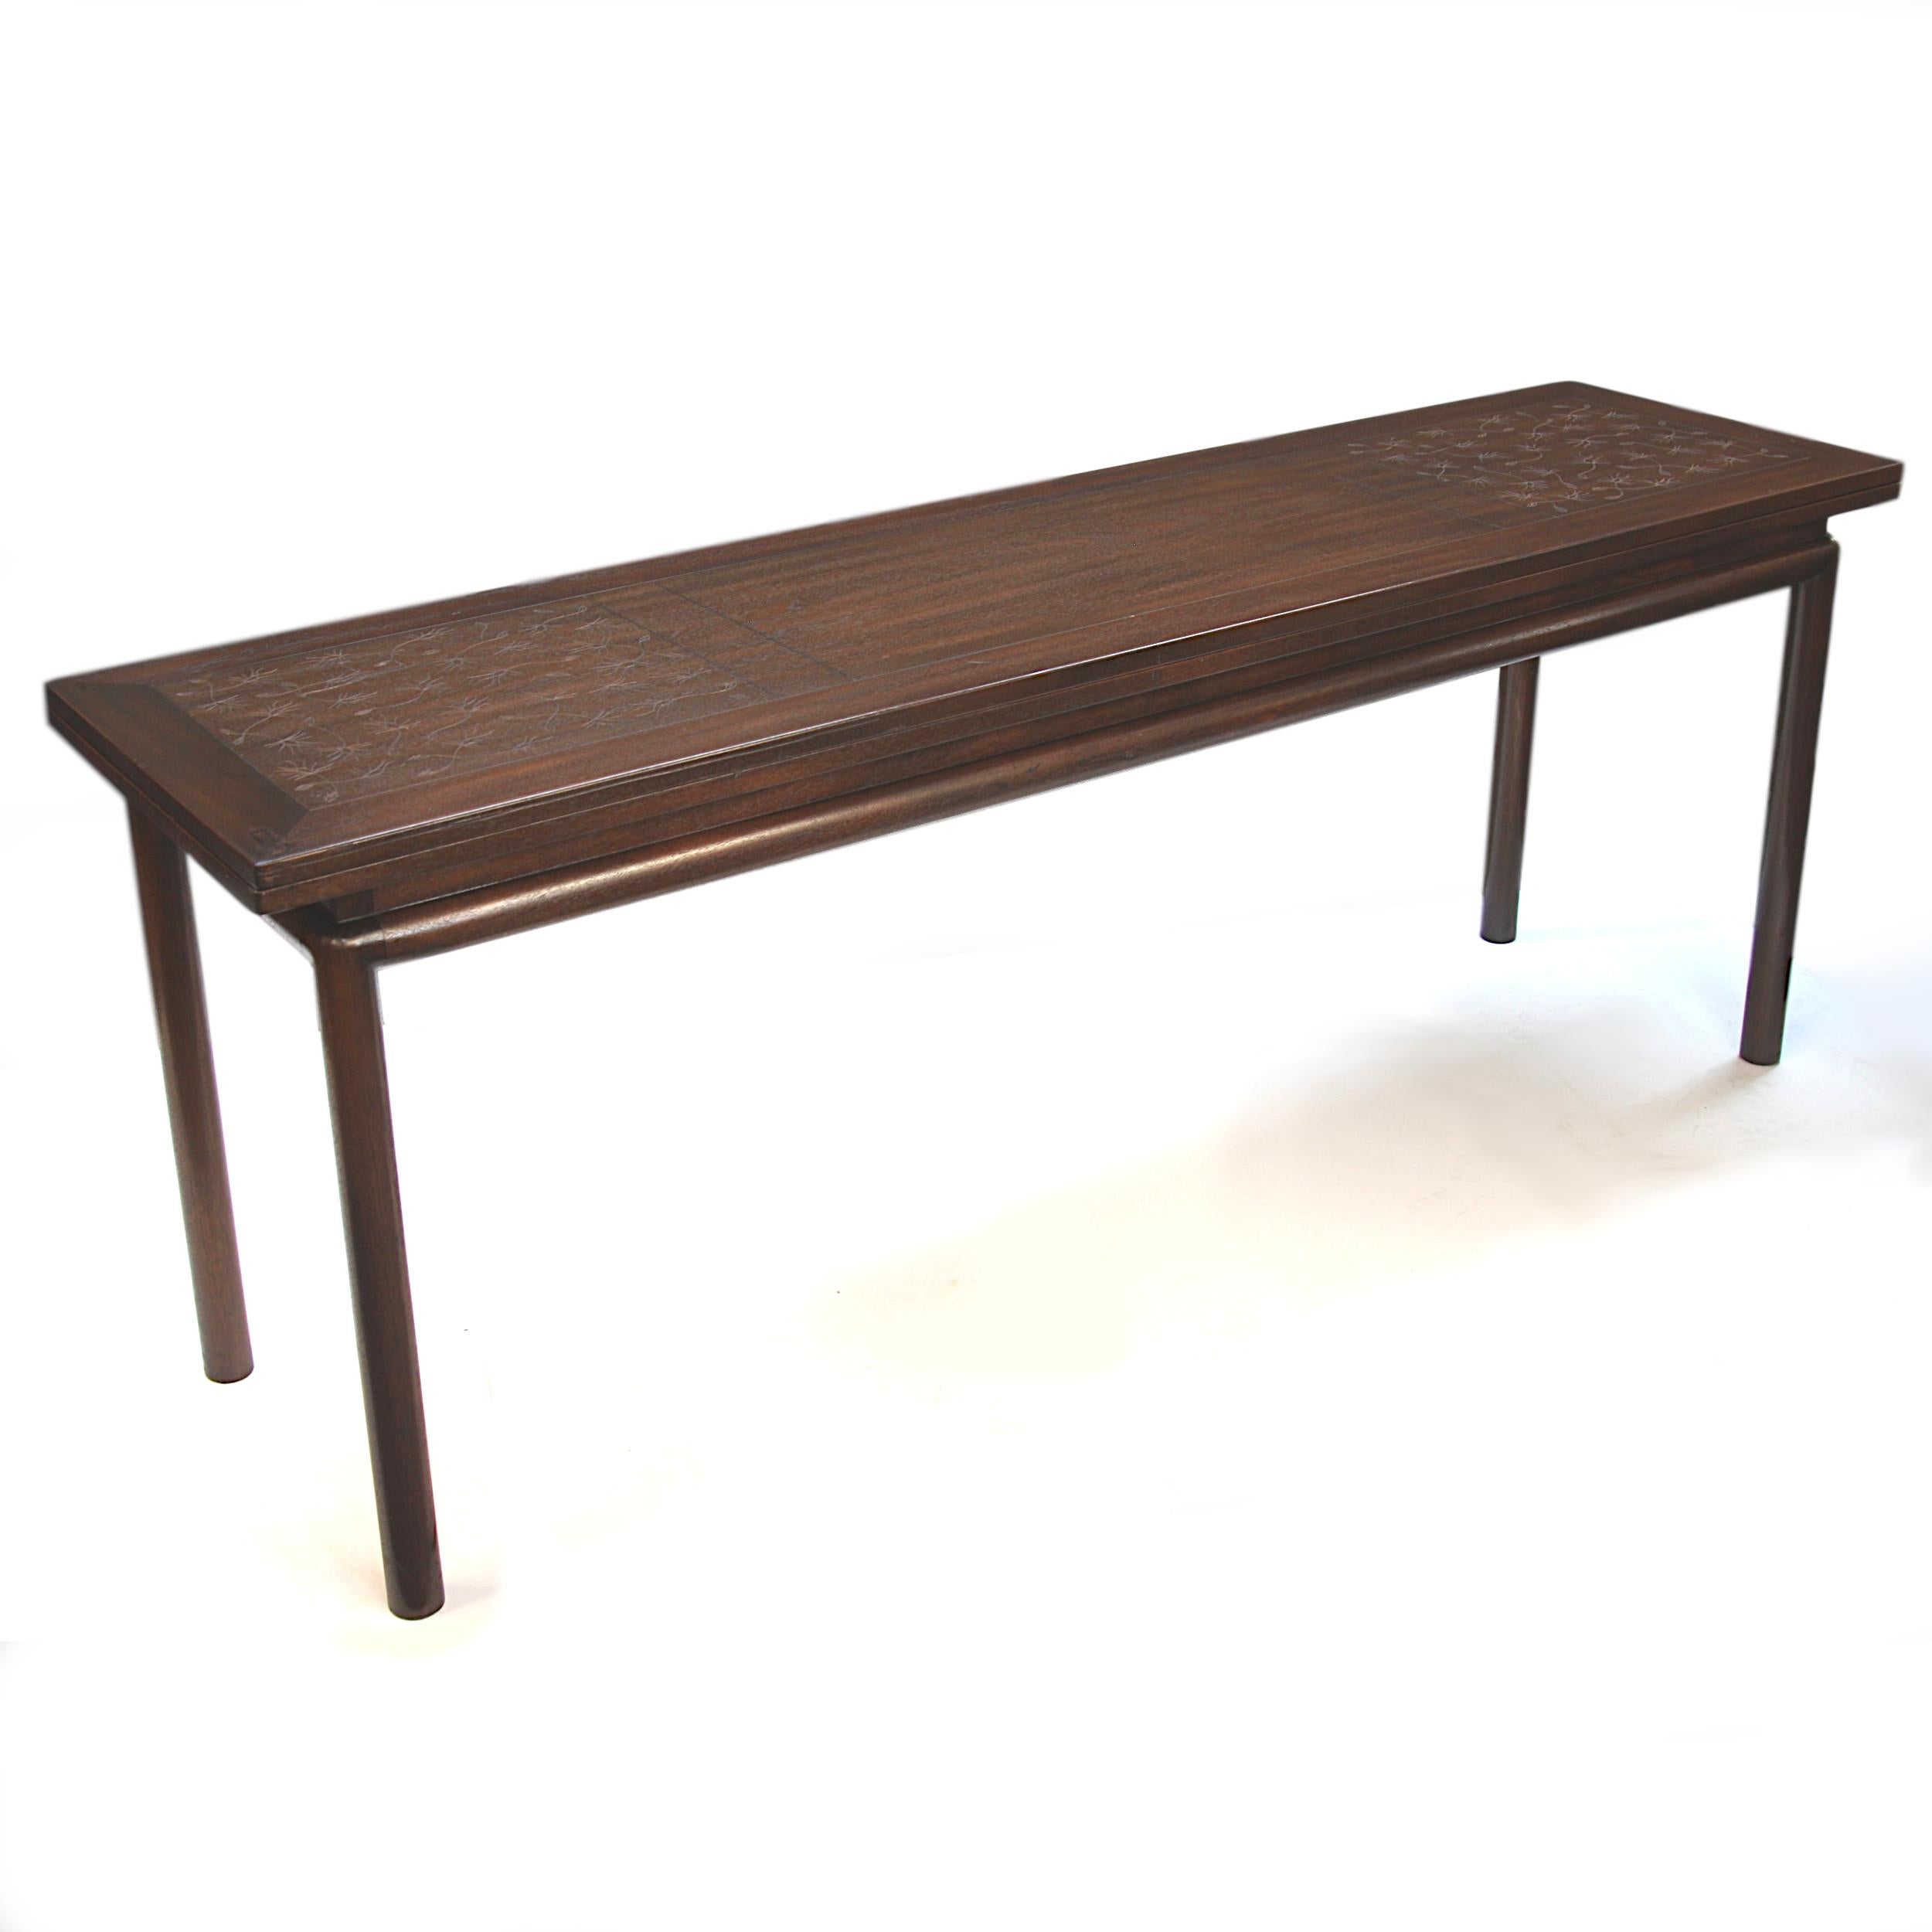 This is a rare 1950s Asian-inspired console table by Kittinger Furnitture Co. of Buffalo, NY. Table features an incised 